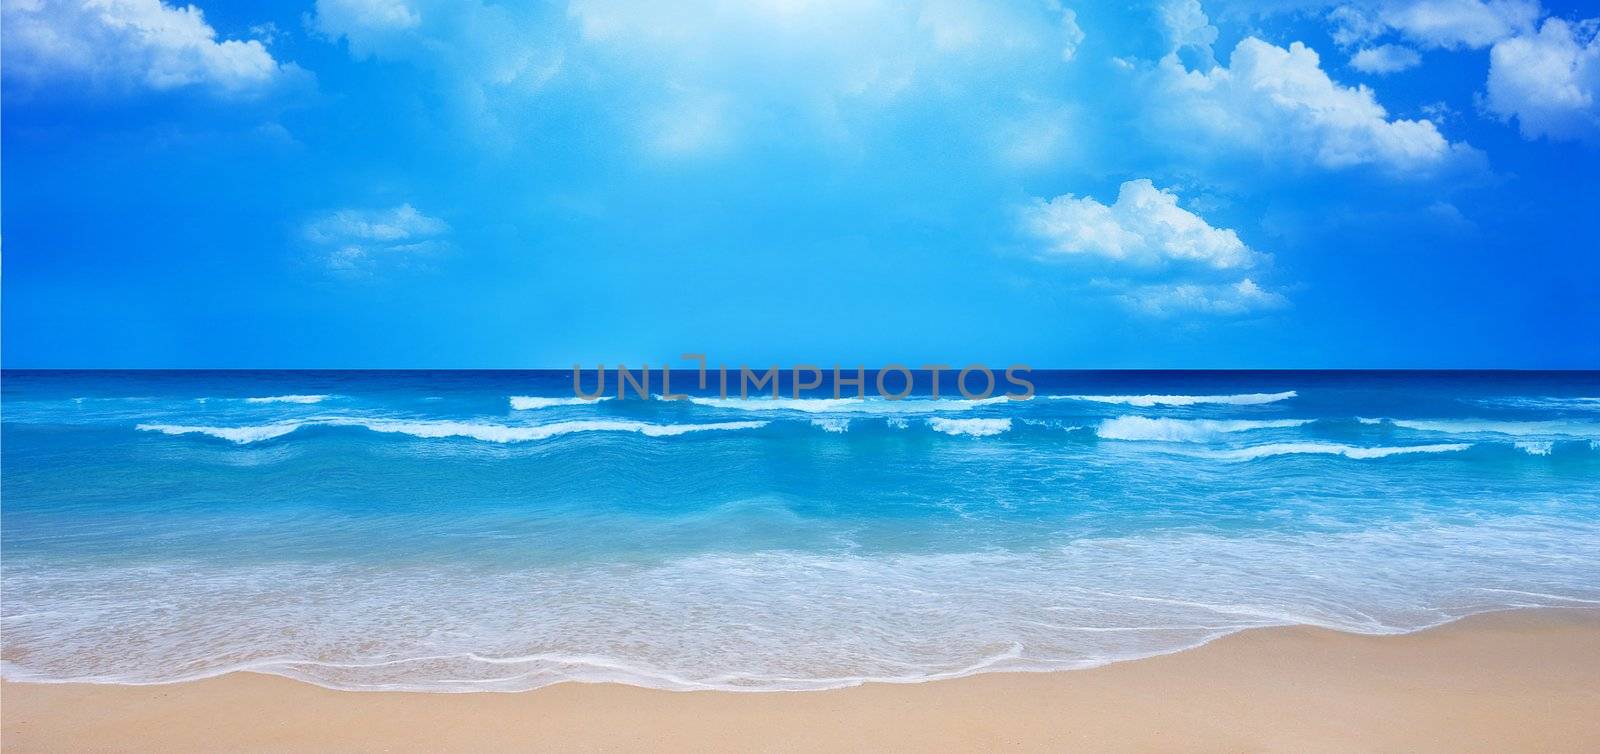 Summertime at the beach background